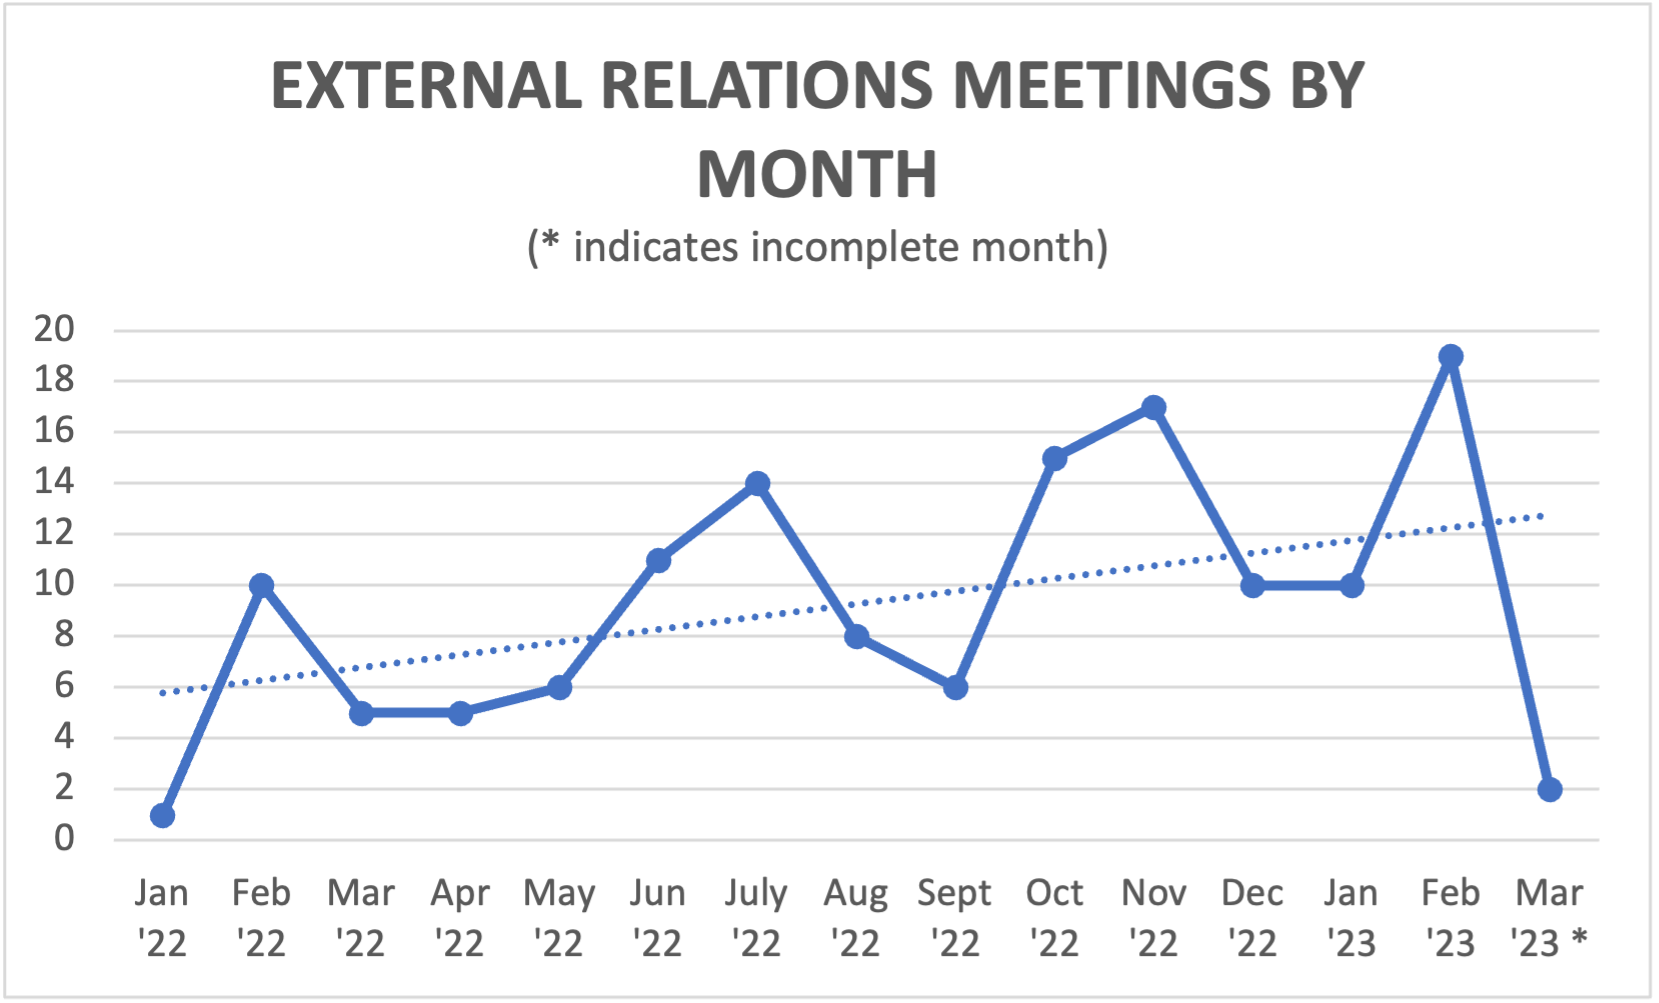 External relations meetings by month